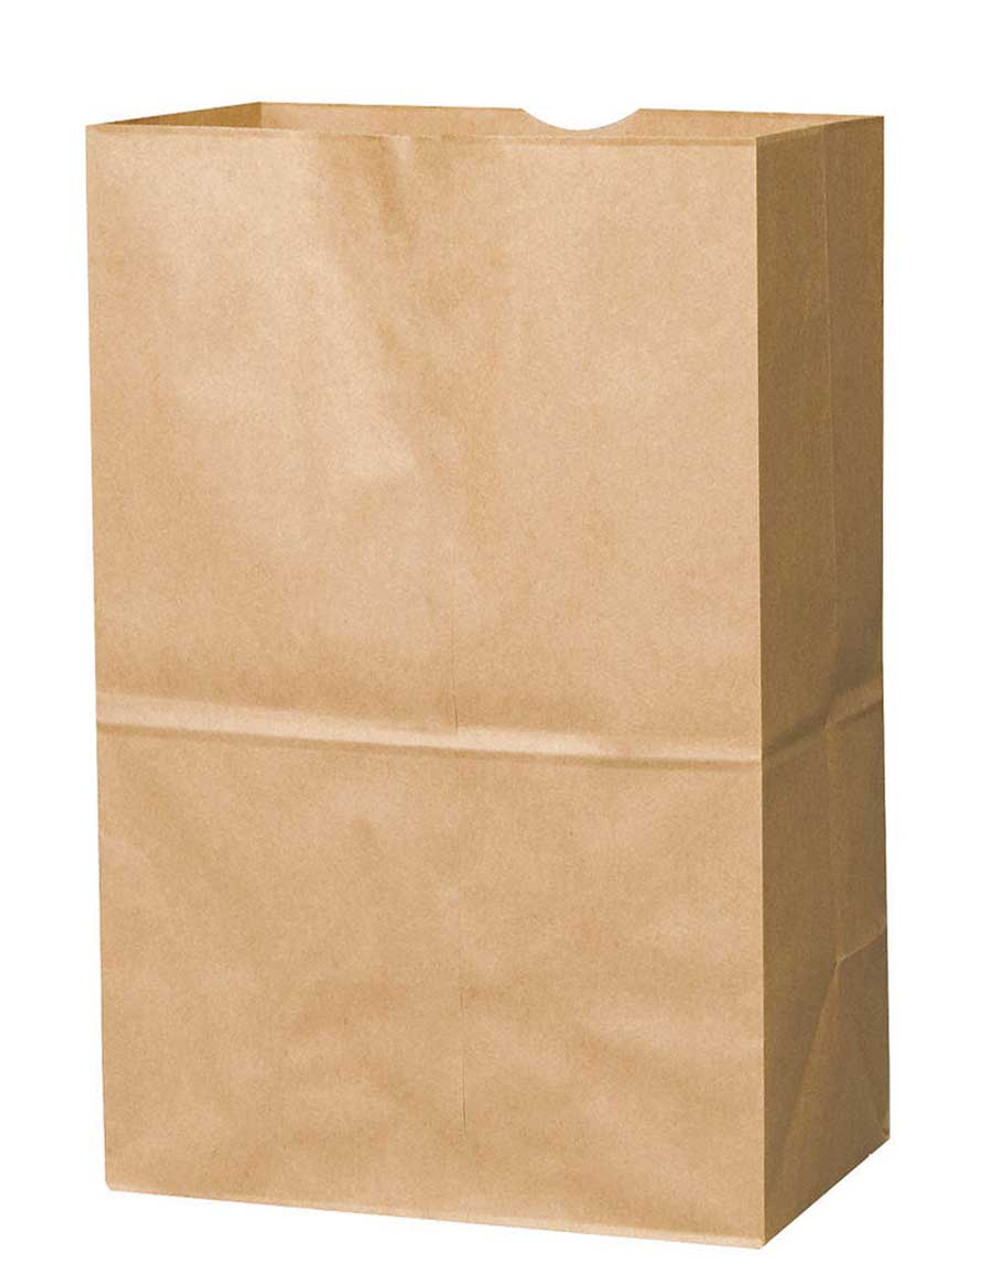 #70 100% Recycled Grocery Style Bag 12" x 7" x 17" per 250